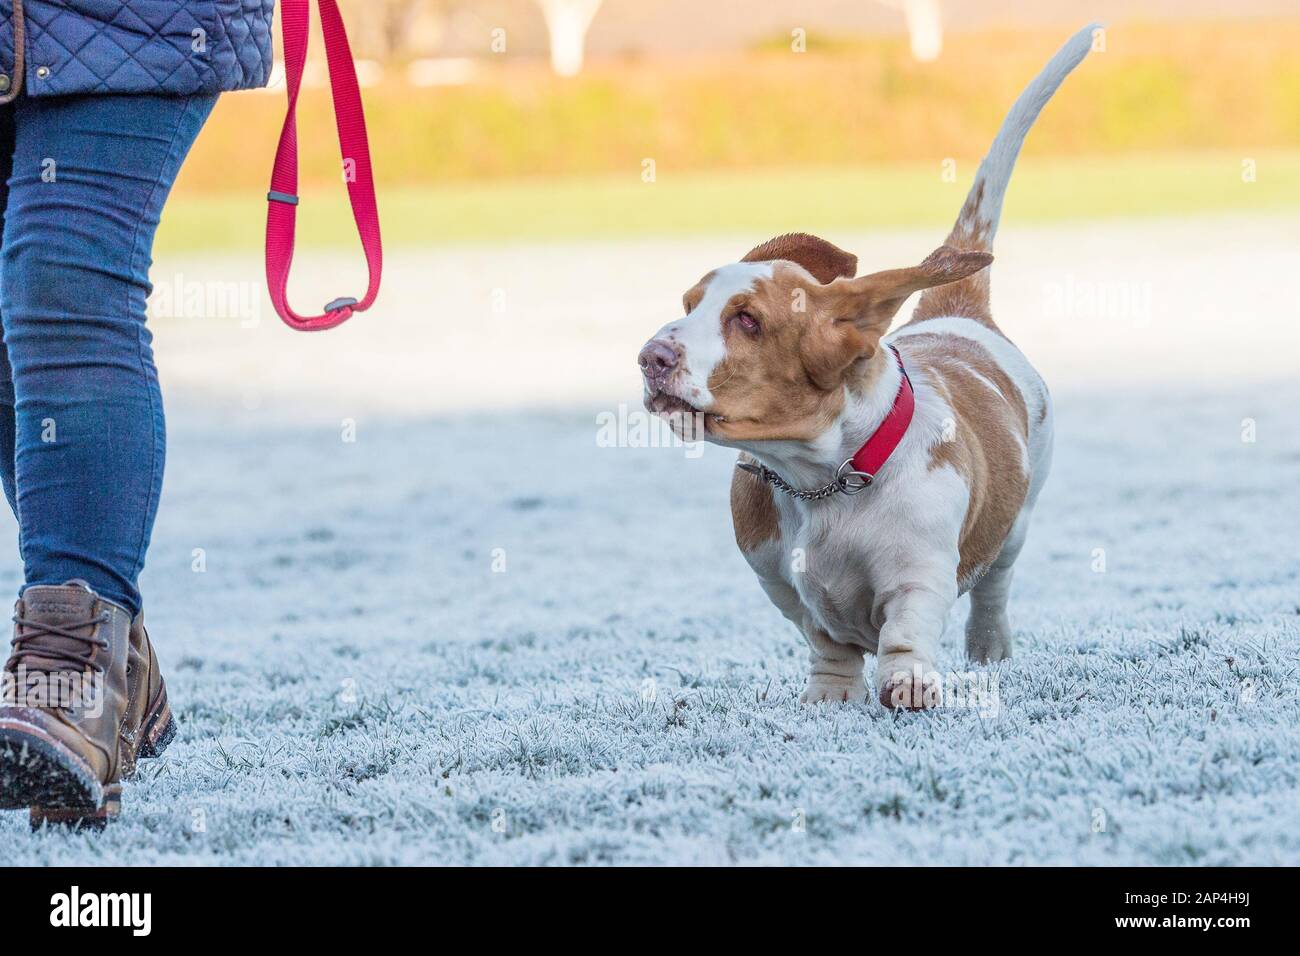 basset hound dog with owner going for a walk Stock Photo